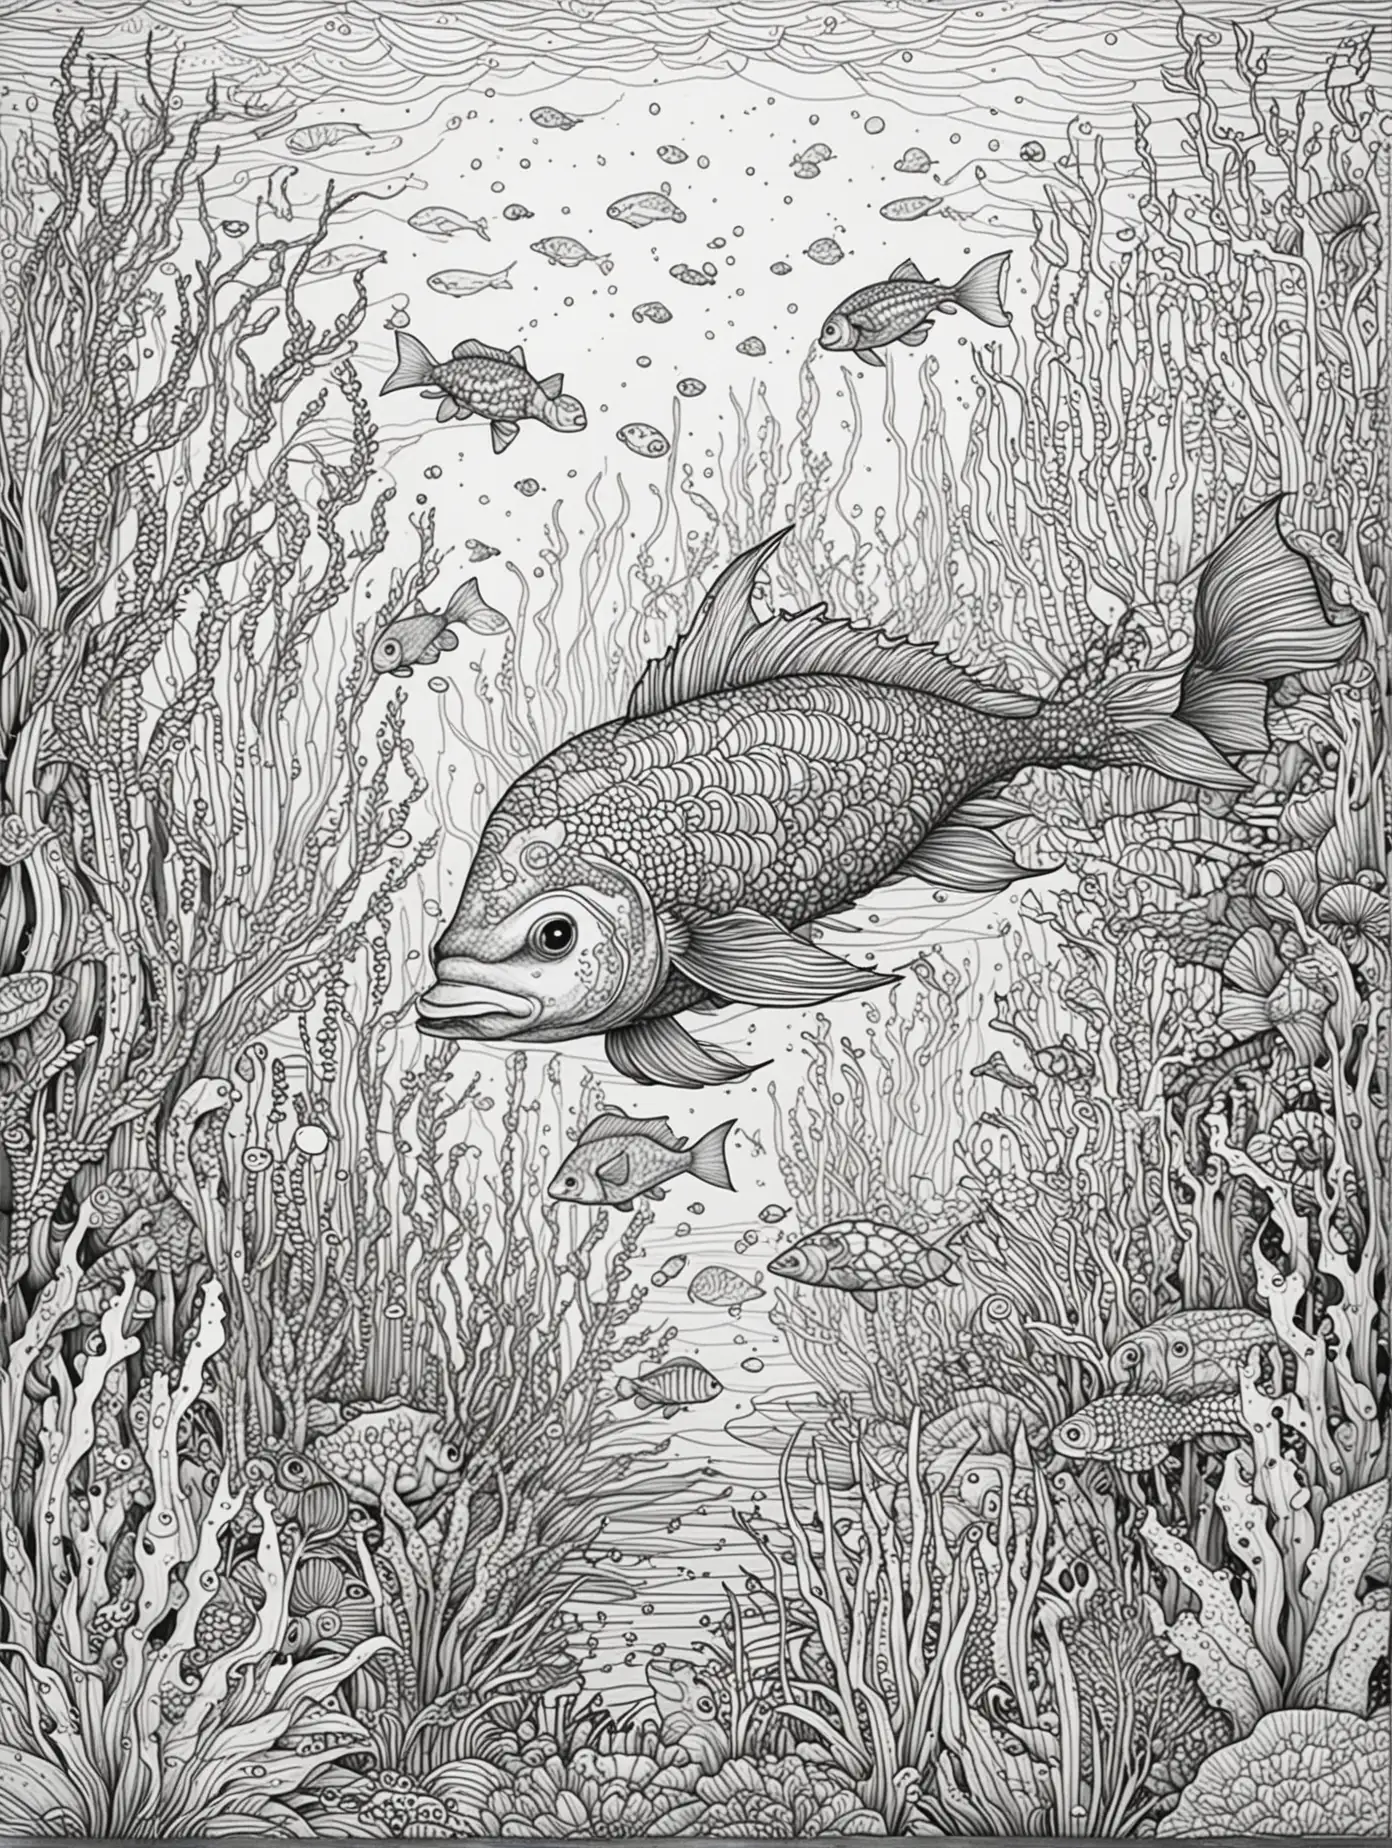 Please create an adult coloring page, black fine lines, themed: Underwater World